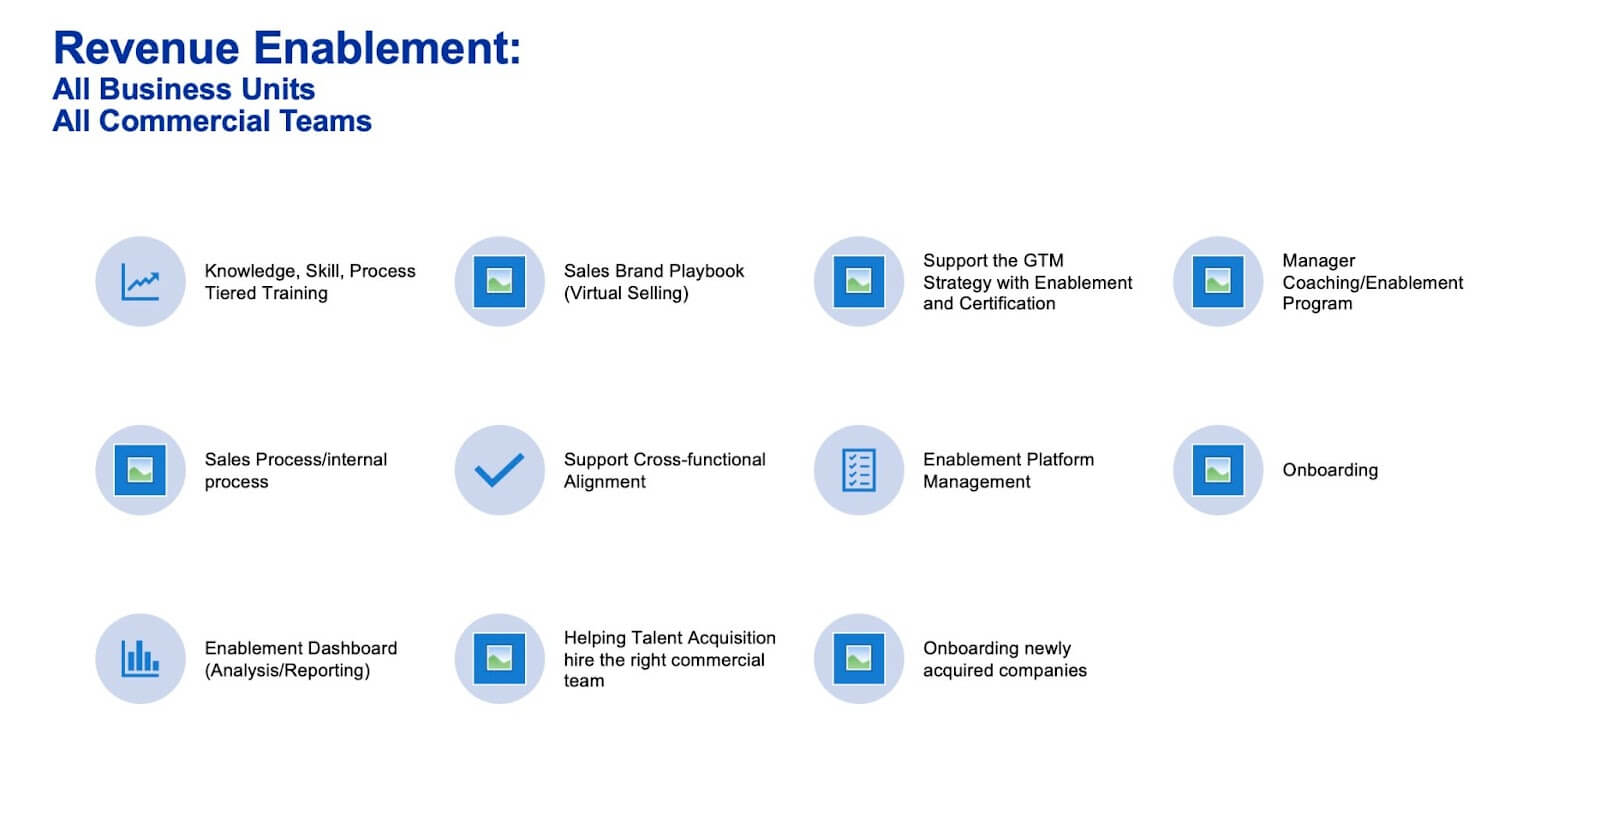 The State of Play in Revenue Enablement on Vimeo